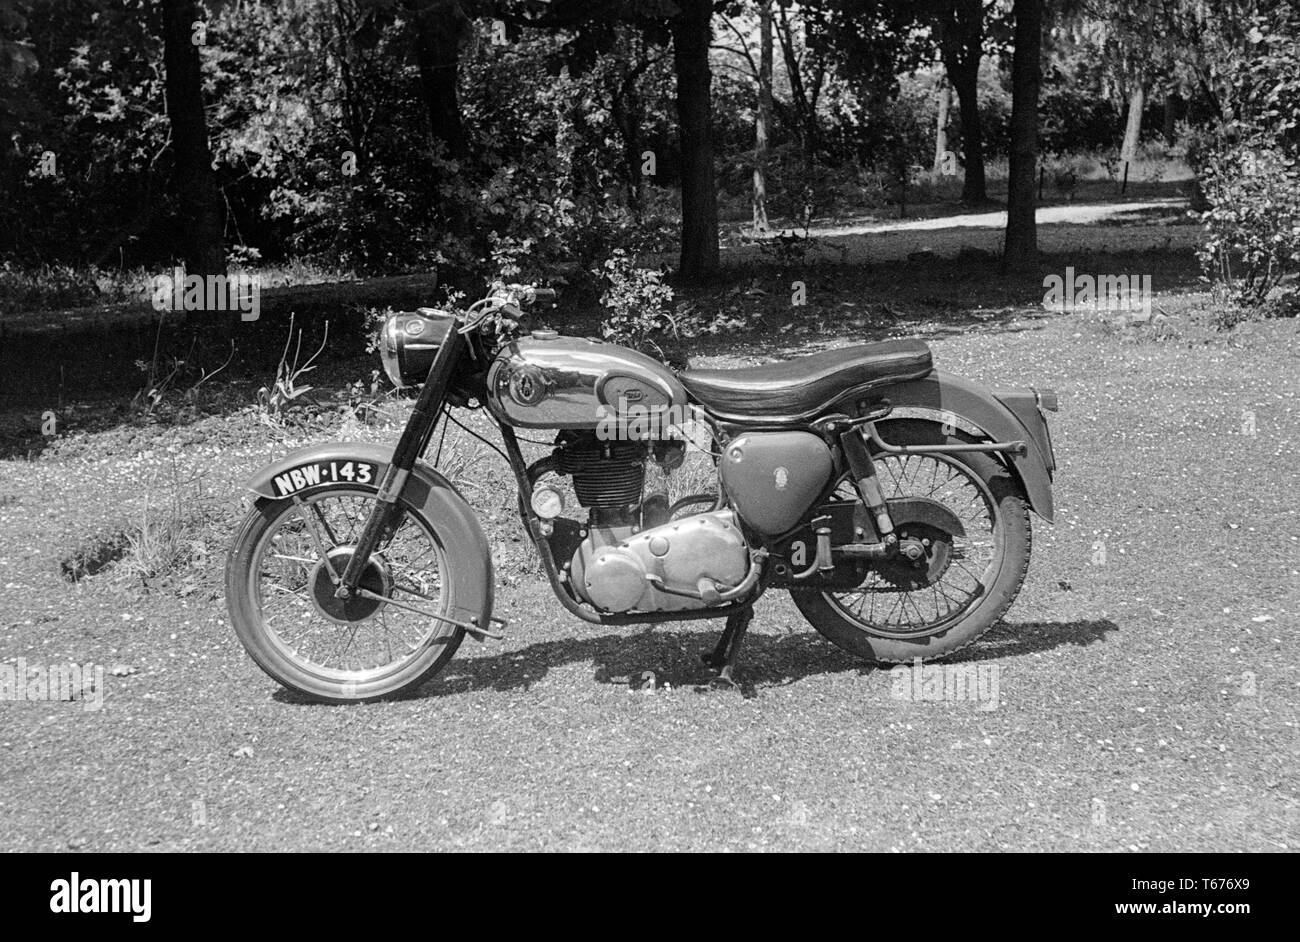 A vintage BSA A10 motorcycle photographed in the late 1950s in England. Stock Photo